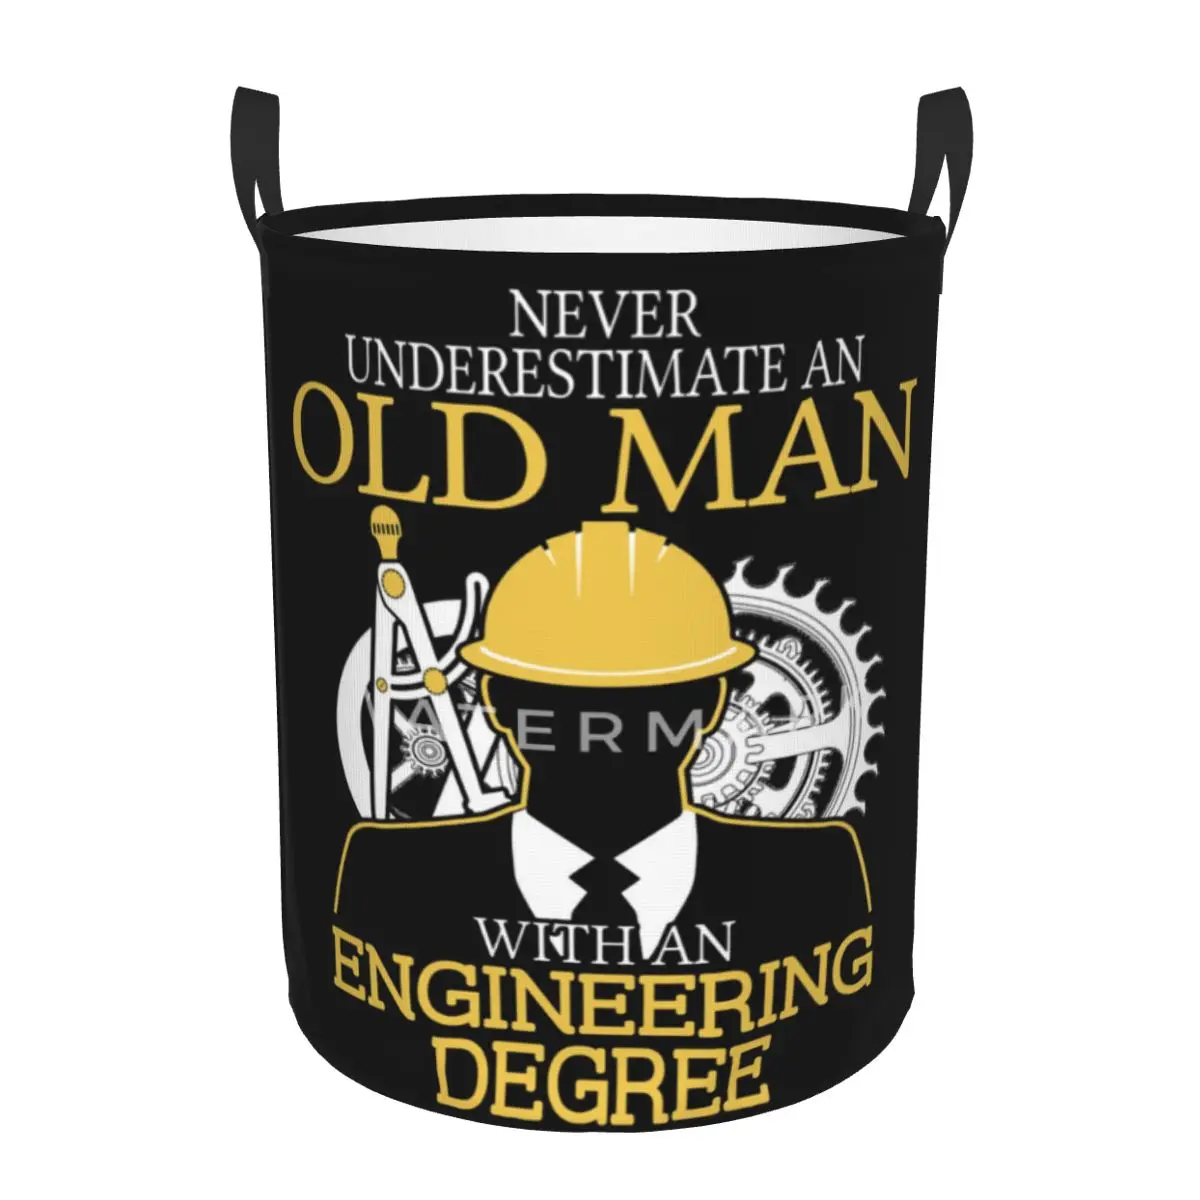 

Never Underestimate Old Man Engineering Degree Circular hamper,Storage Basket Sturdy and durable bathrooms toys